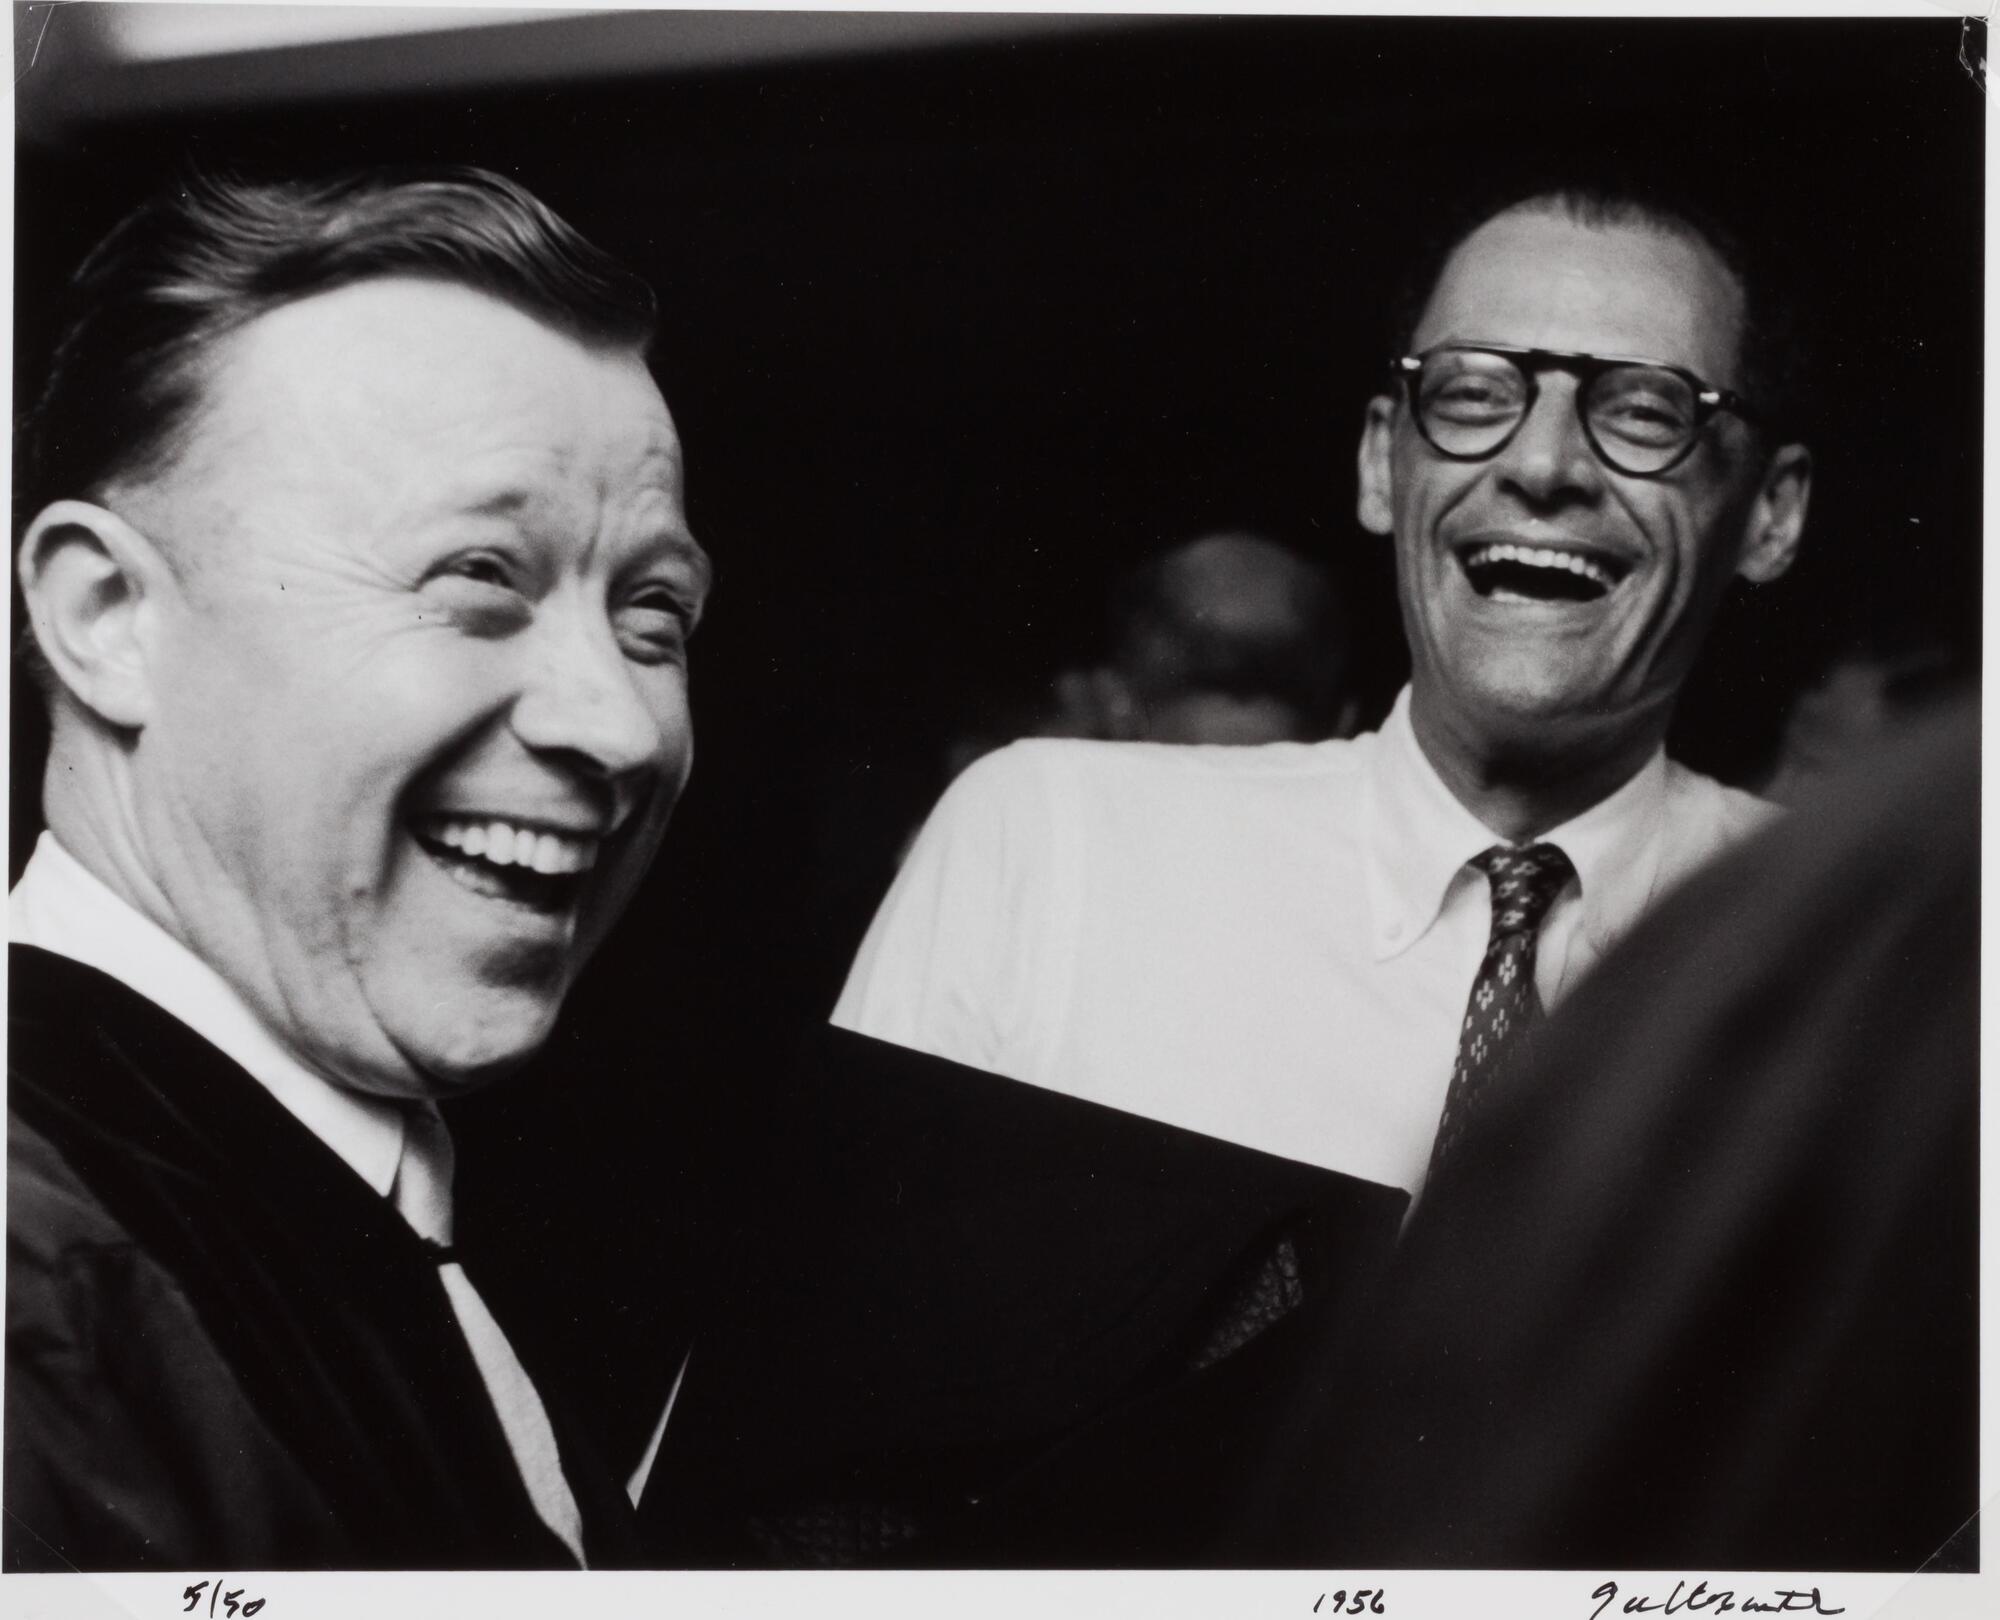 Two men standing next to eachother, both are laughing. One is wearing a suit jacket, the other is in a white shirt and tie with glasses.